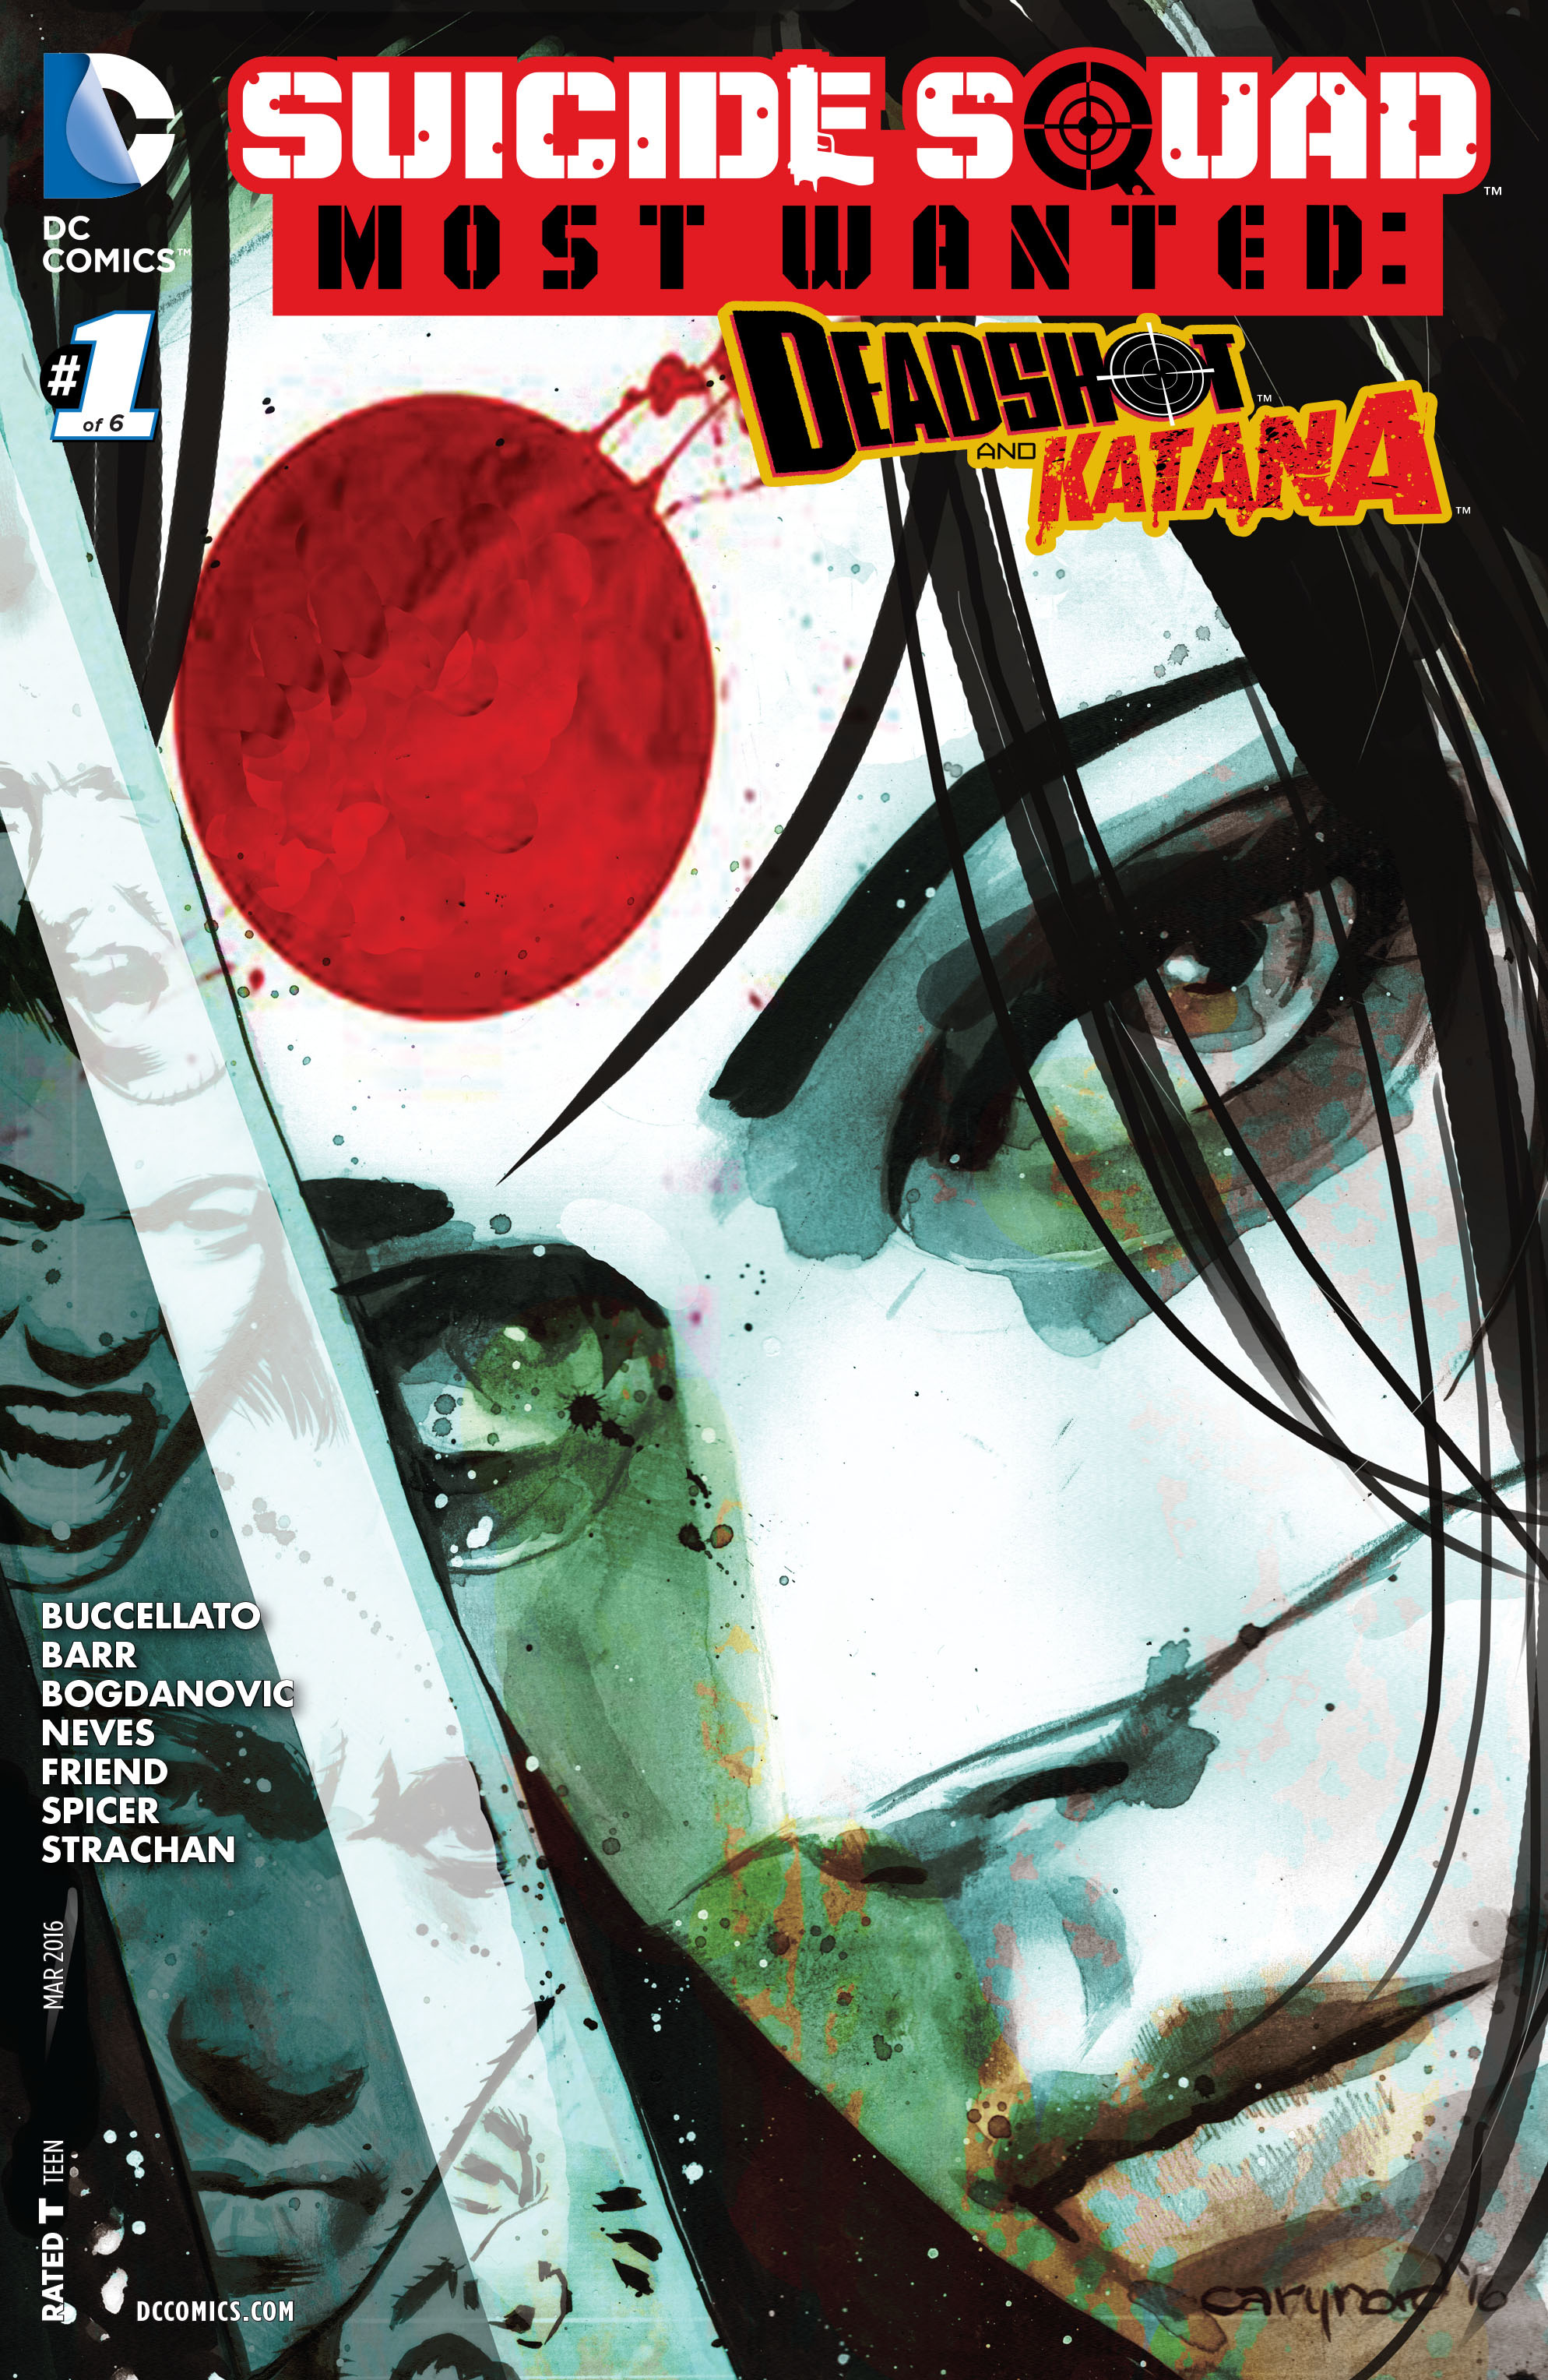 Read online Suicide Squad Most Wanted: Deadshot and Katana comic -  Issue #1 - 2